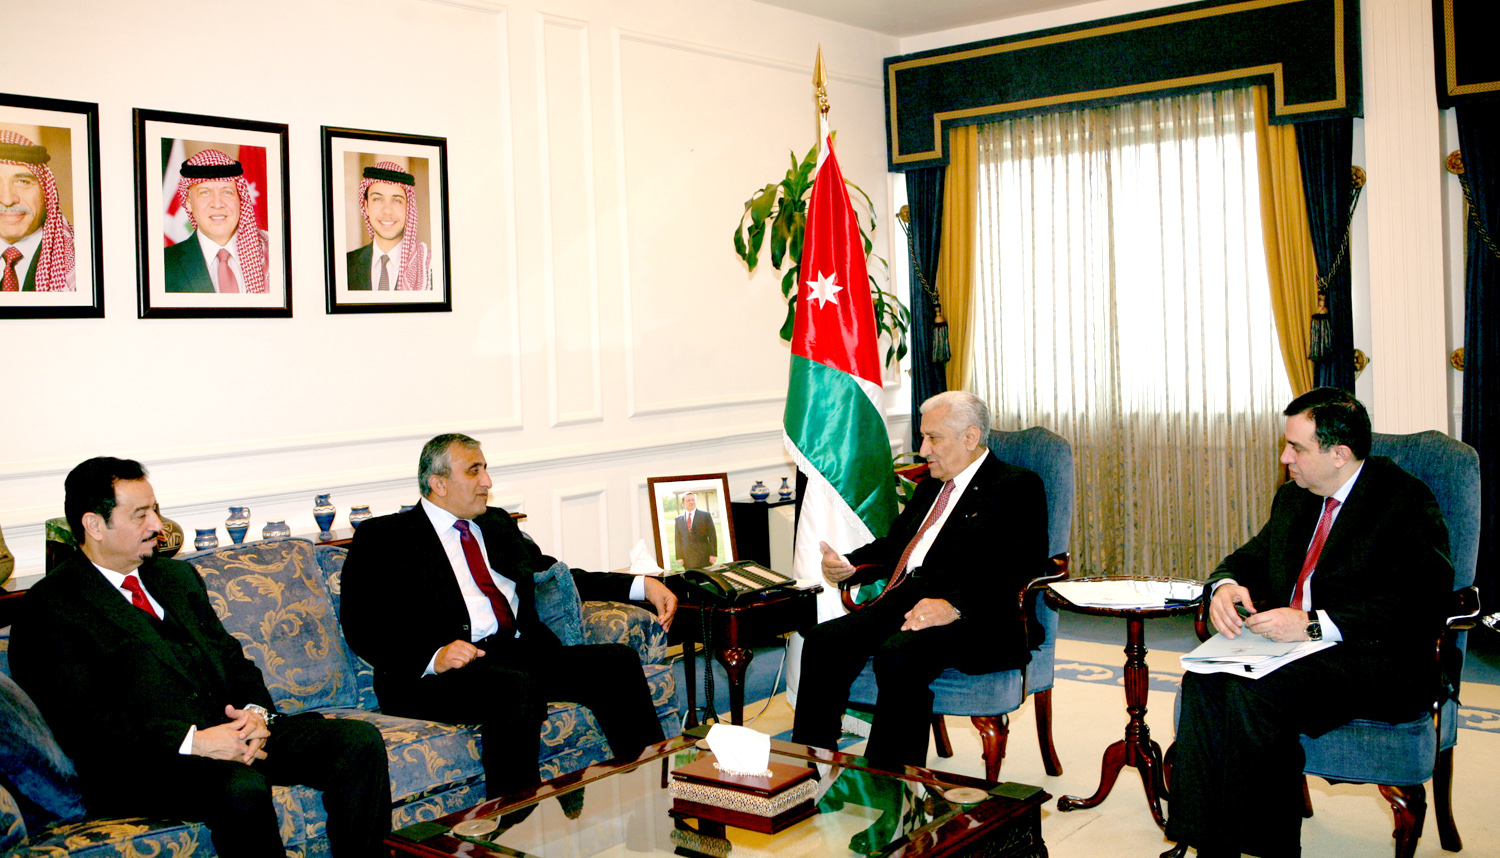 Jordanian Prime Minister Abdullah Ensour in a meeting with Director General of the Kuwait Fund for Arab Economic Development (KFAED) Abdulwahab Al-Bader